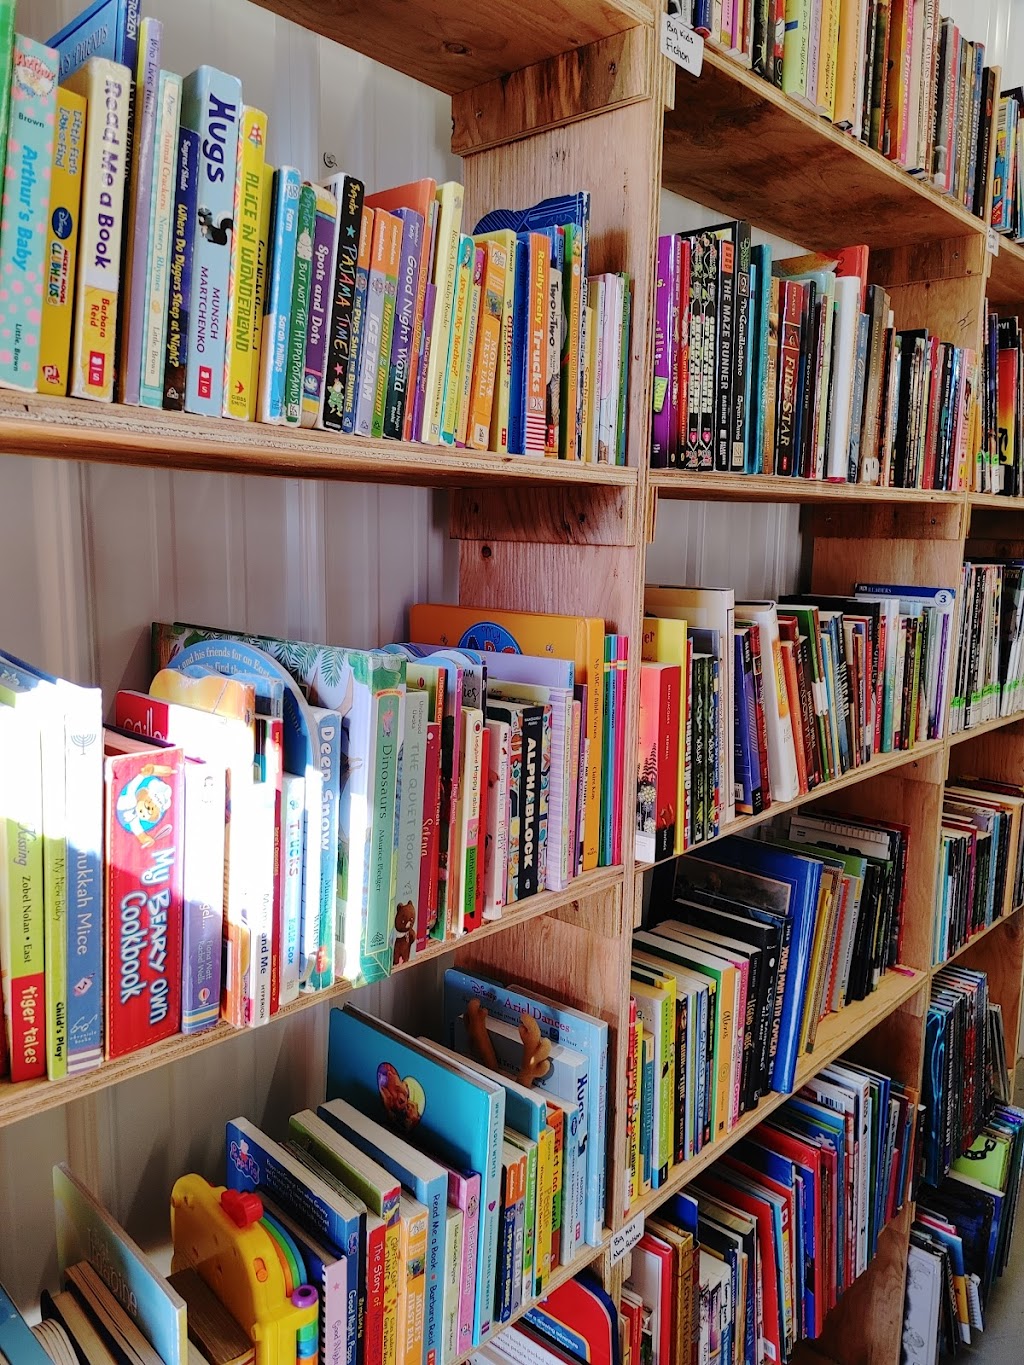 Forest Books & Media | 371 1st St, Winkler, MB R6W 2R8, Canada | Phone: (204) 362-3345